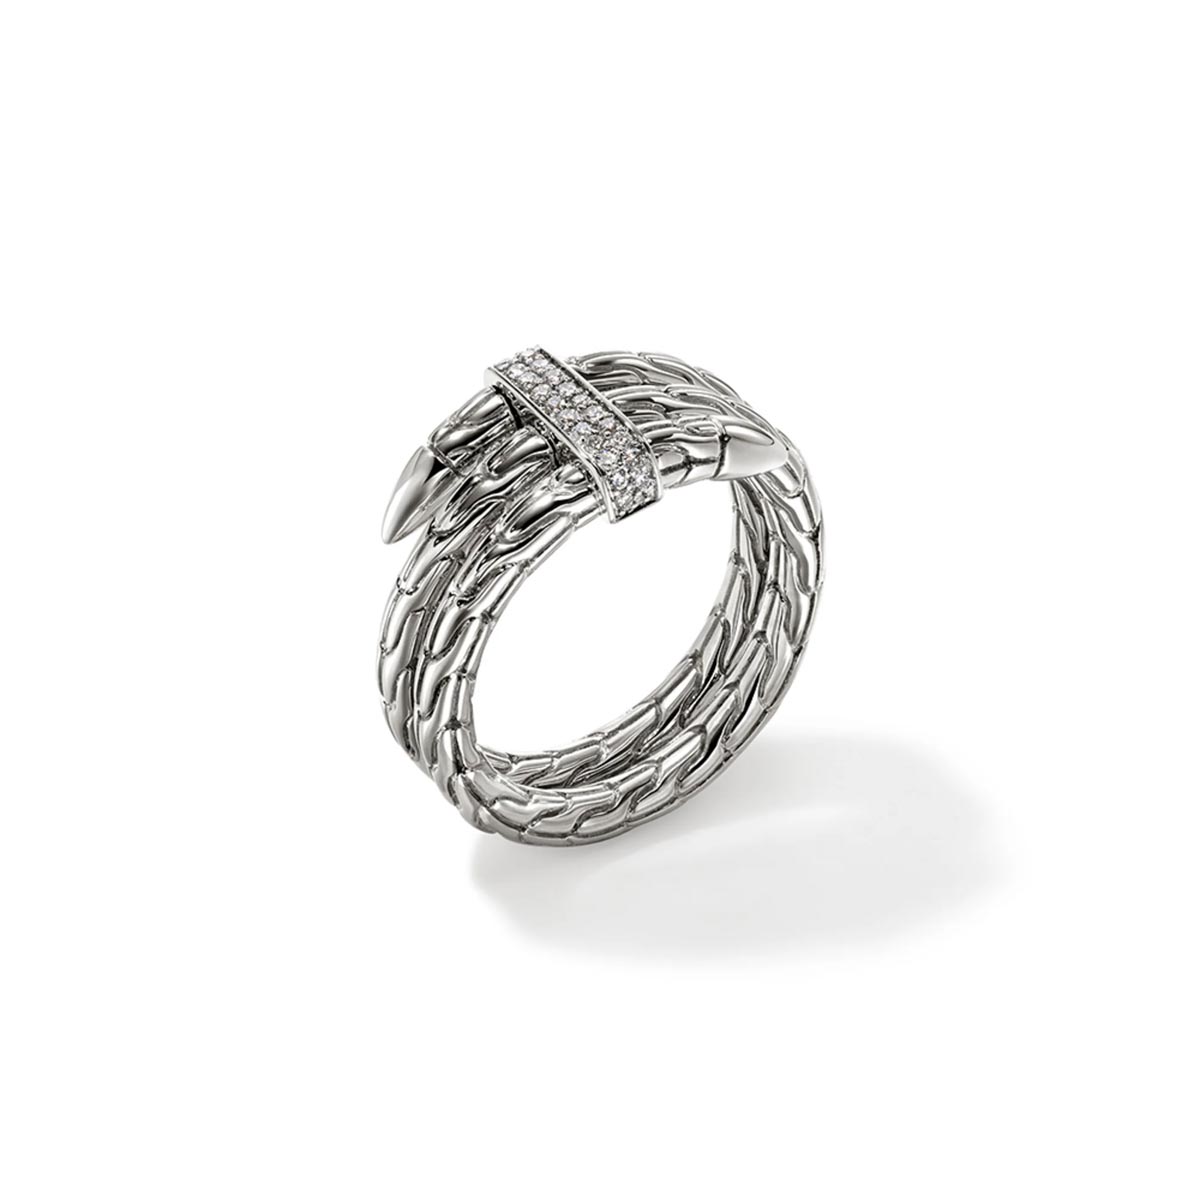 John Hardy Spear Collection Diamond Wrap Ring in Sterling Silver (size 7)